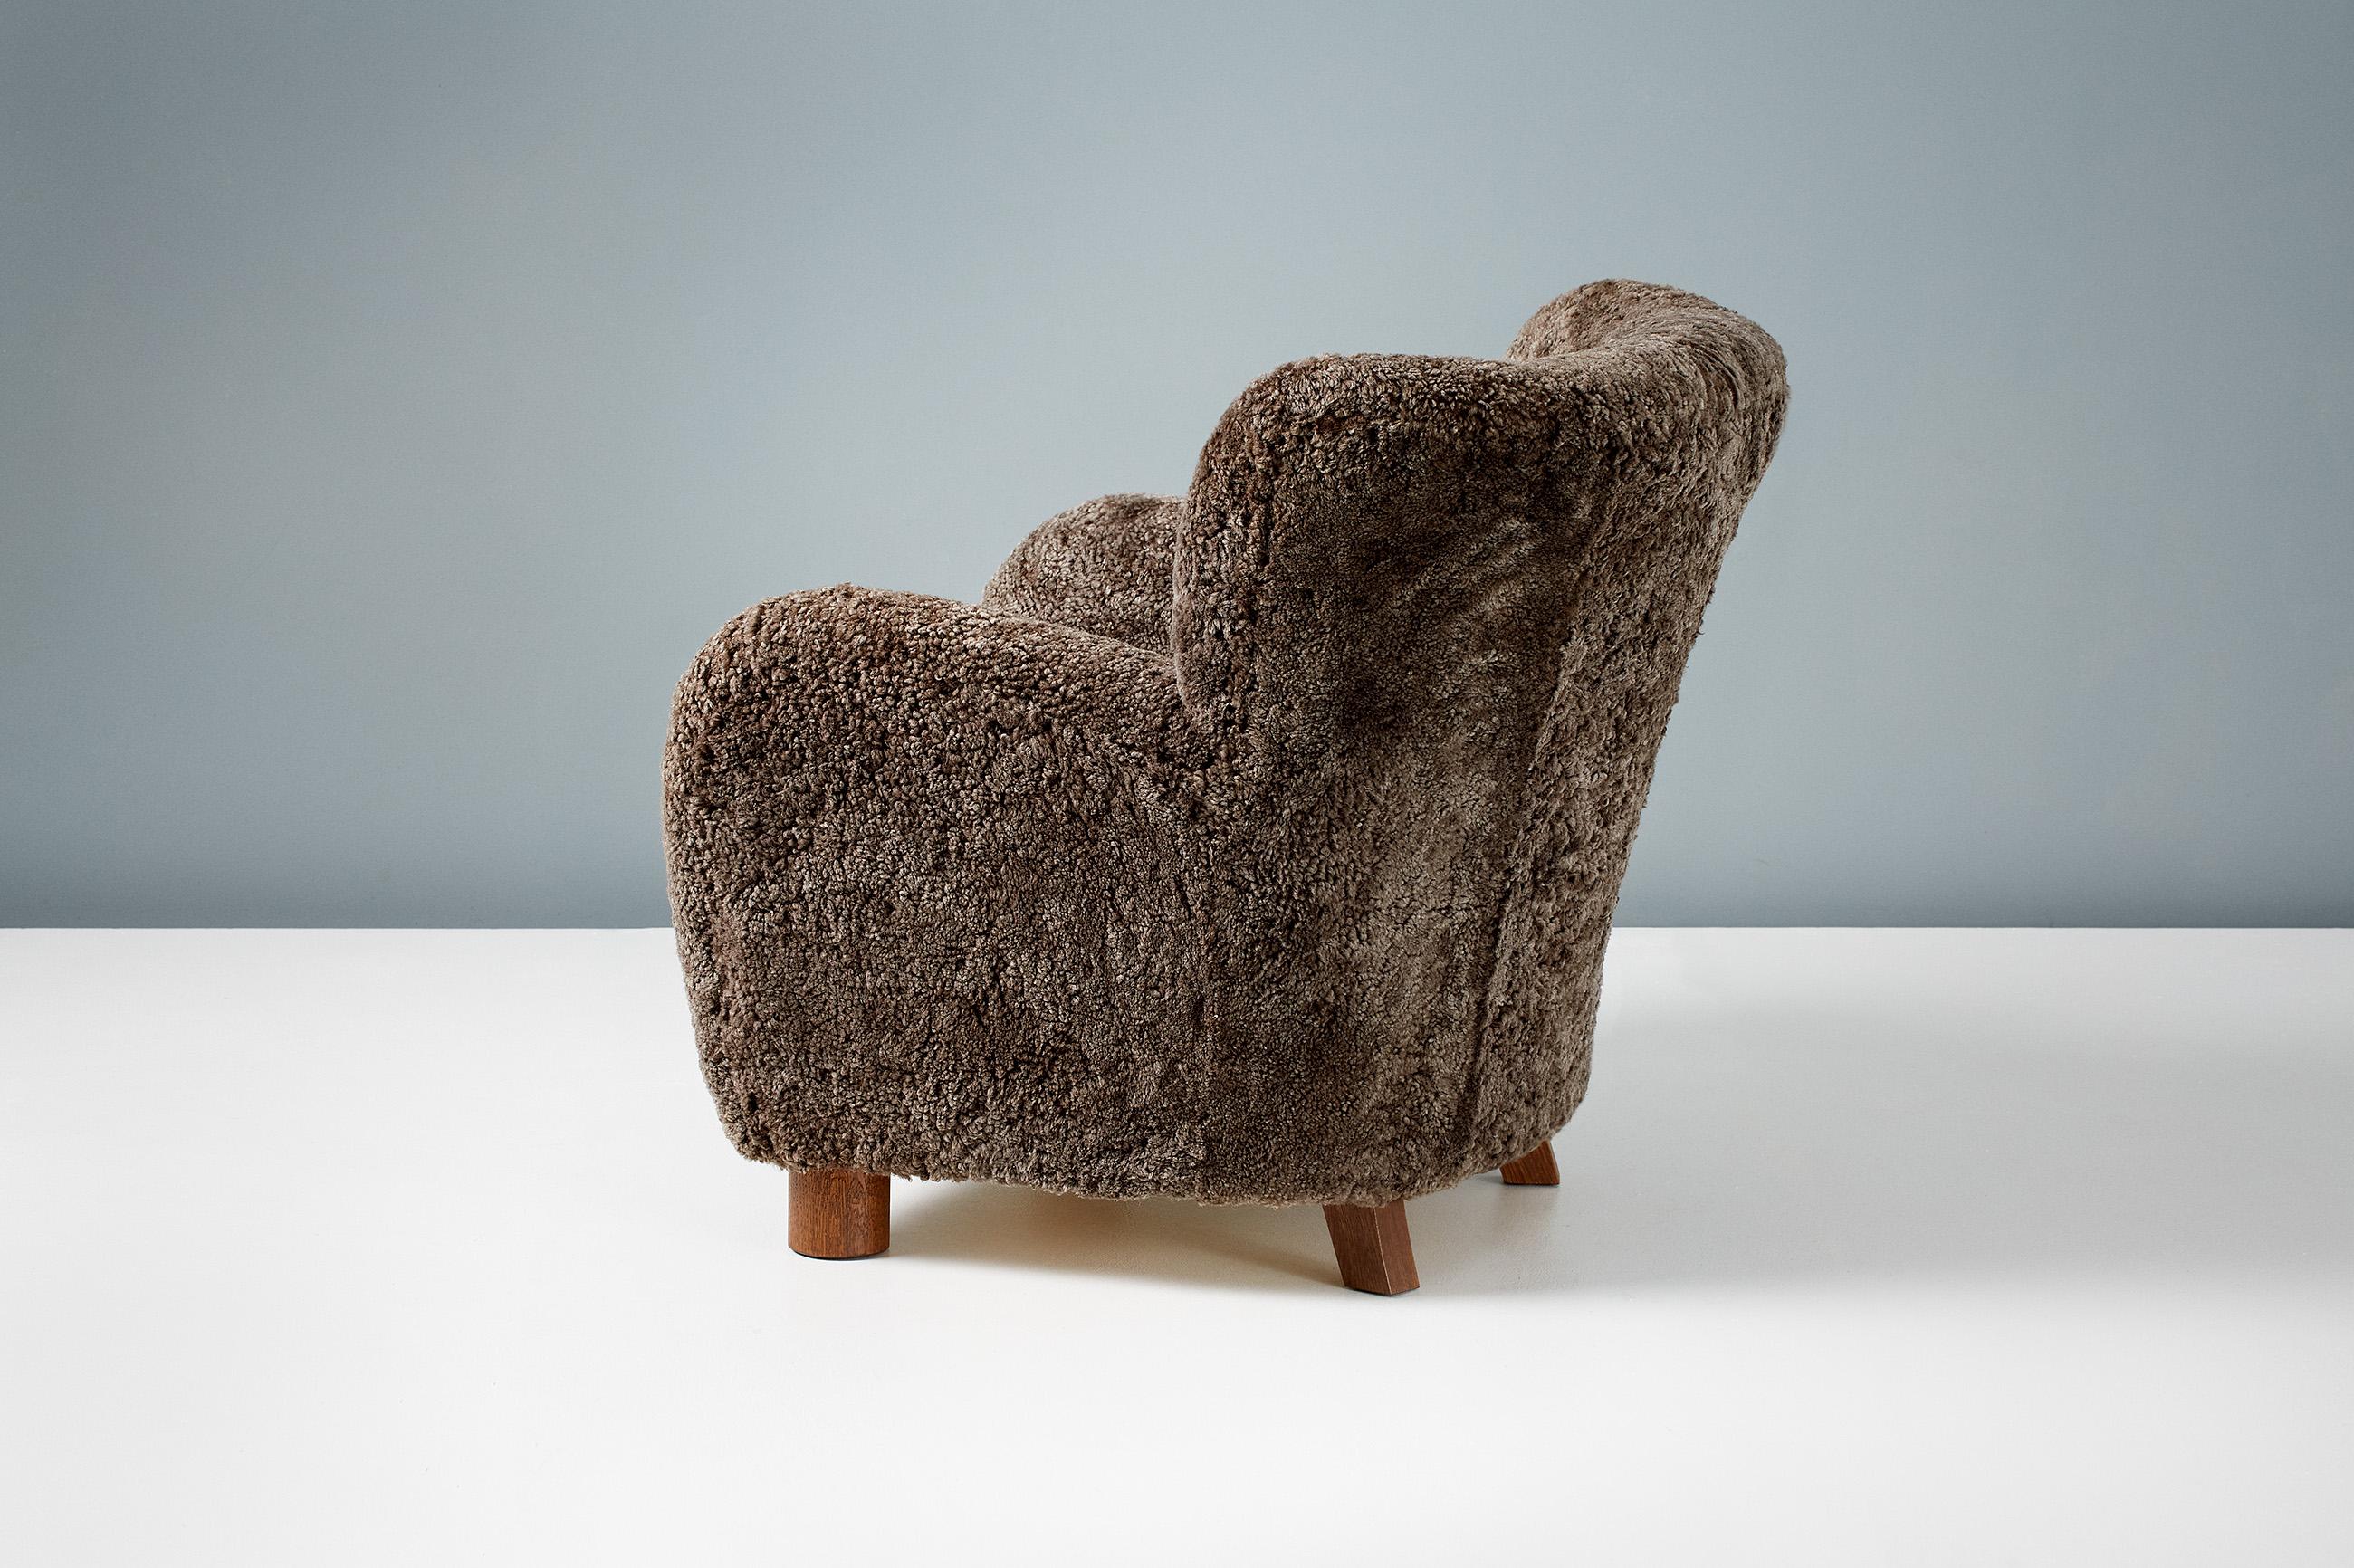 A custom-made lounge chair developed & produced at our workshops in London using the highest quality materials. This chair has been upholstered in luxurious brown Australian sheepskin and has fumed oak legs.